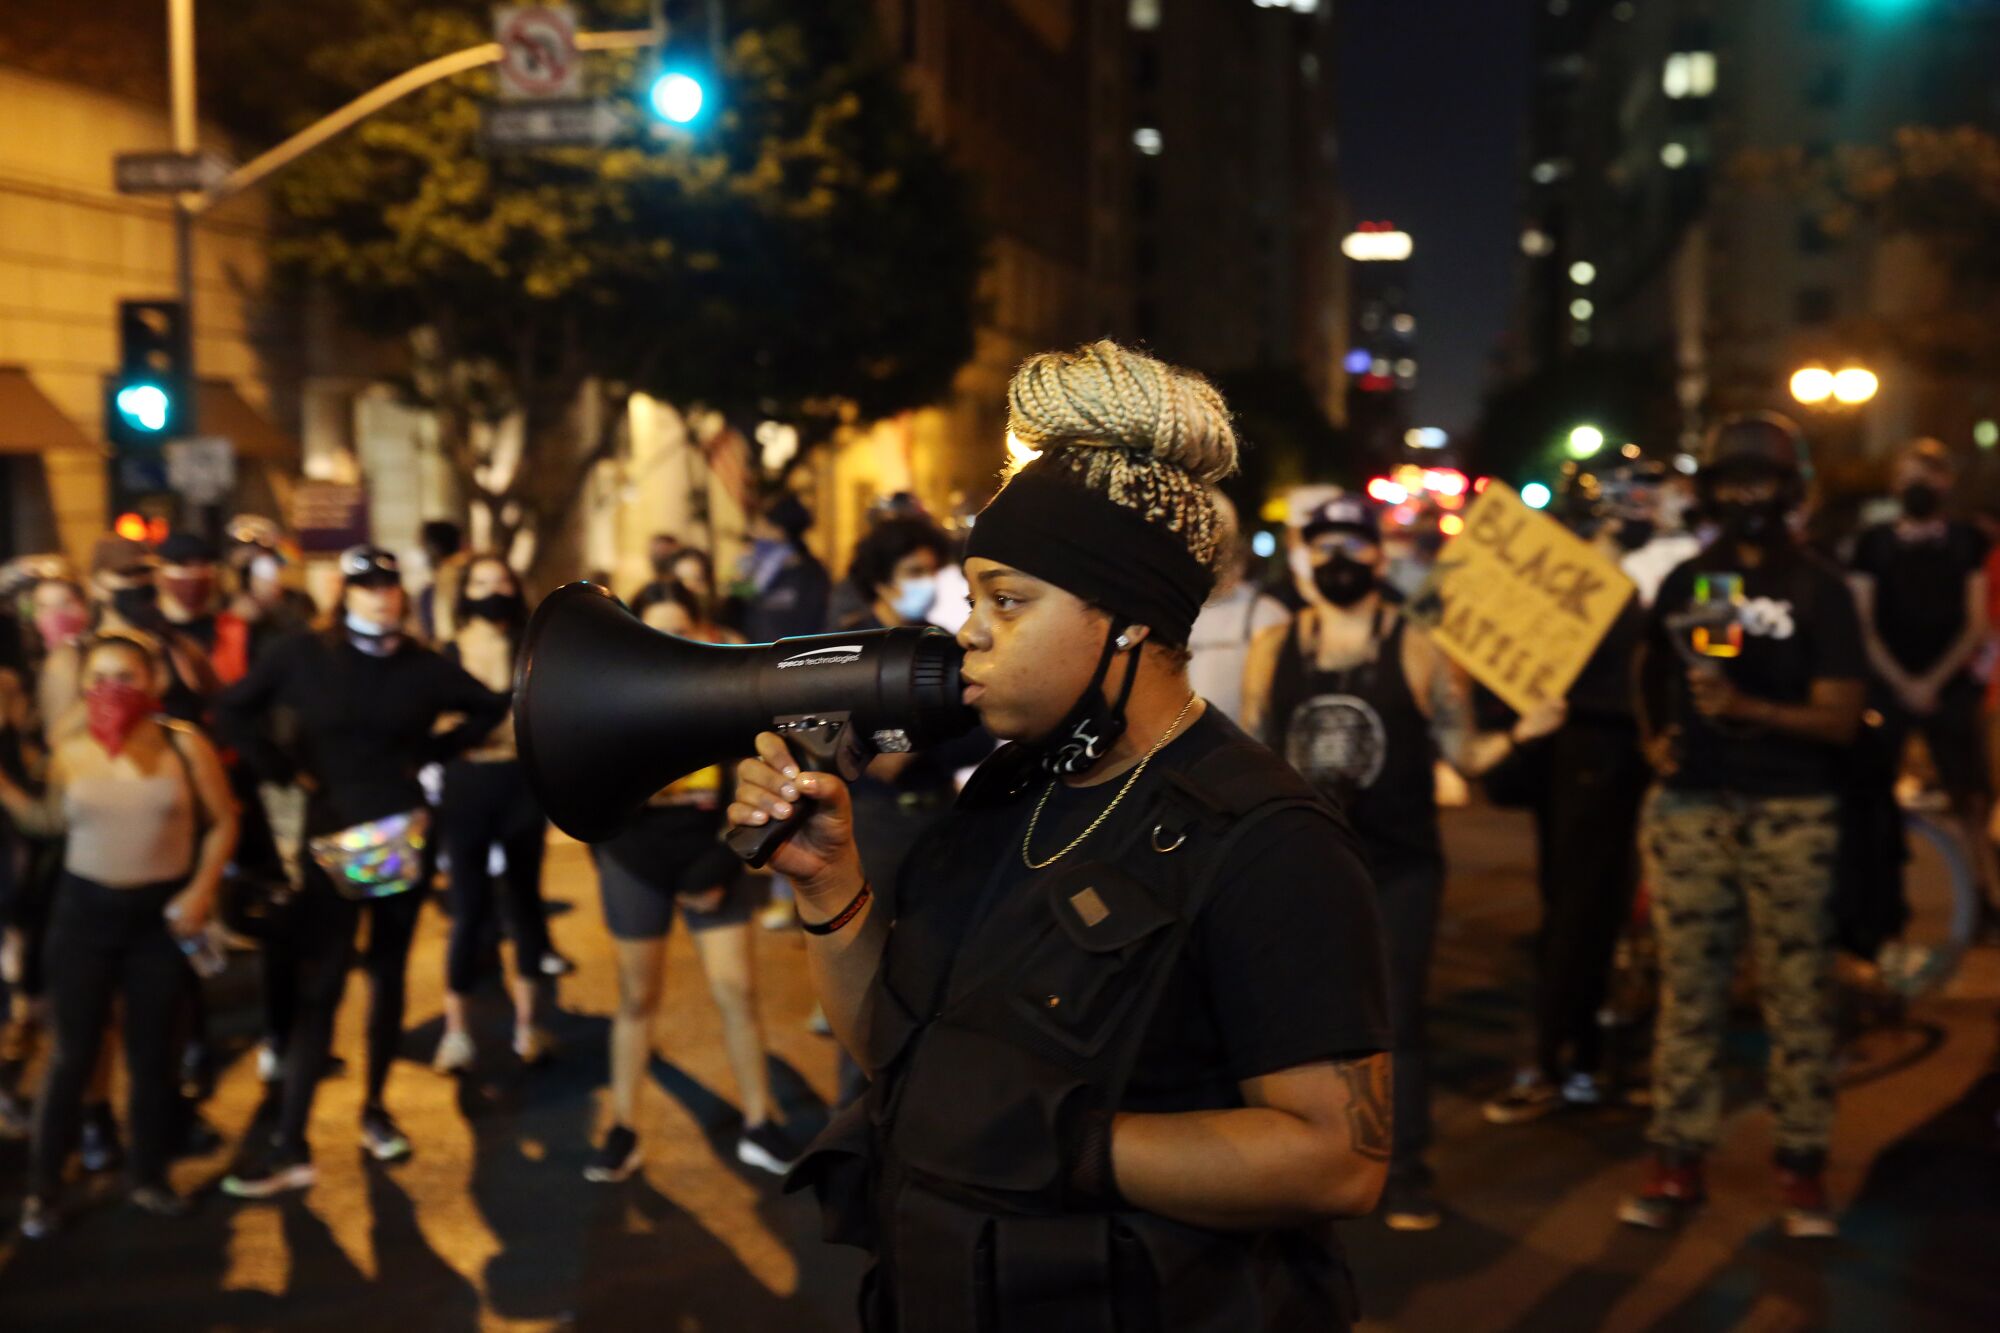 A demonstrator speaks to the crowd during a protest in downtown L.A. before entering the 3rd Street tunnel.